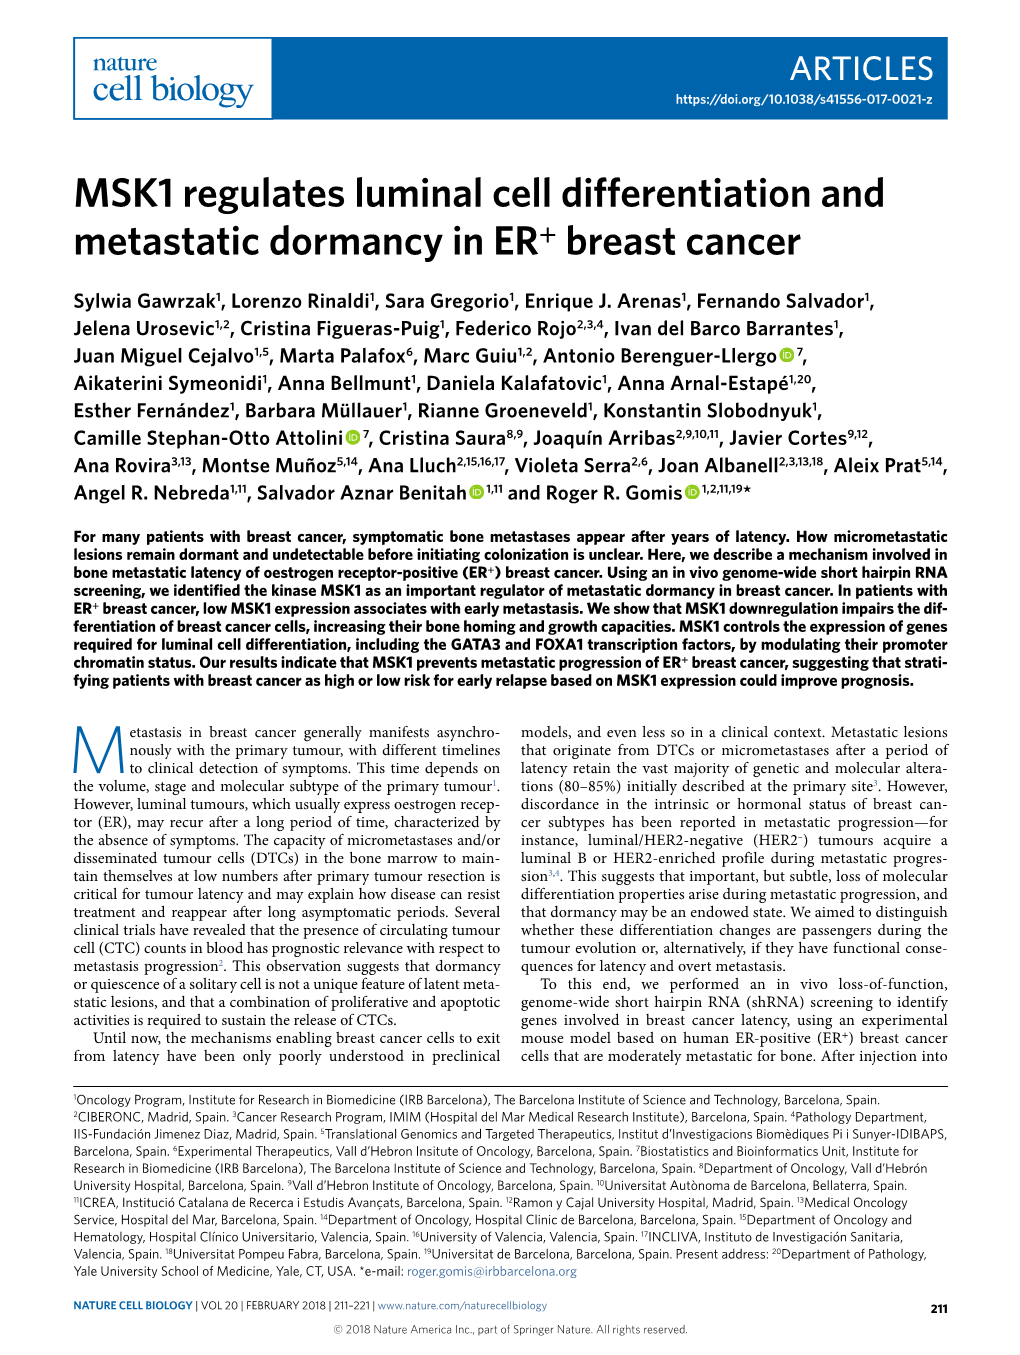 MSK1 Regulates Luminal Cell Differentiation and Metastatic Dormancy in ER+ Breast Cancer